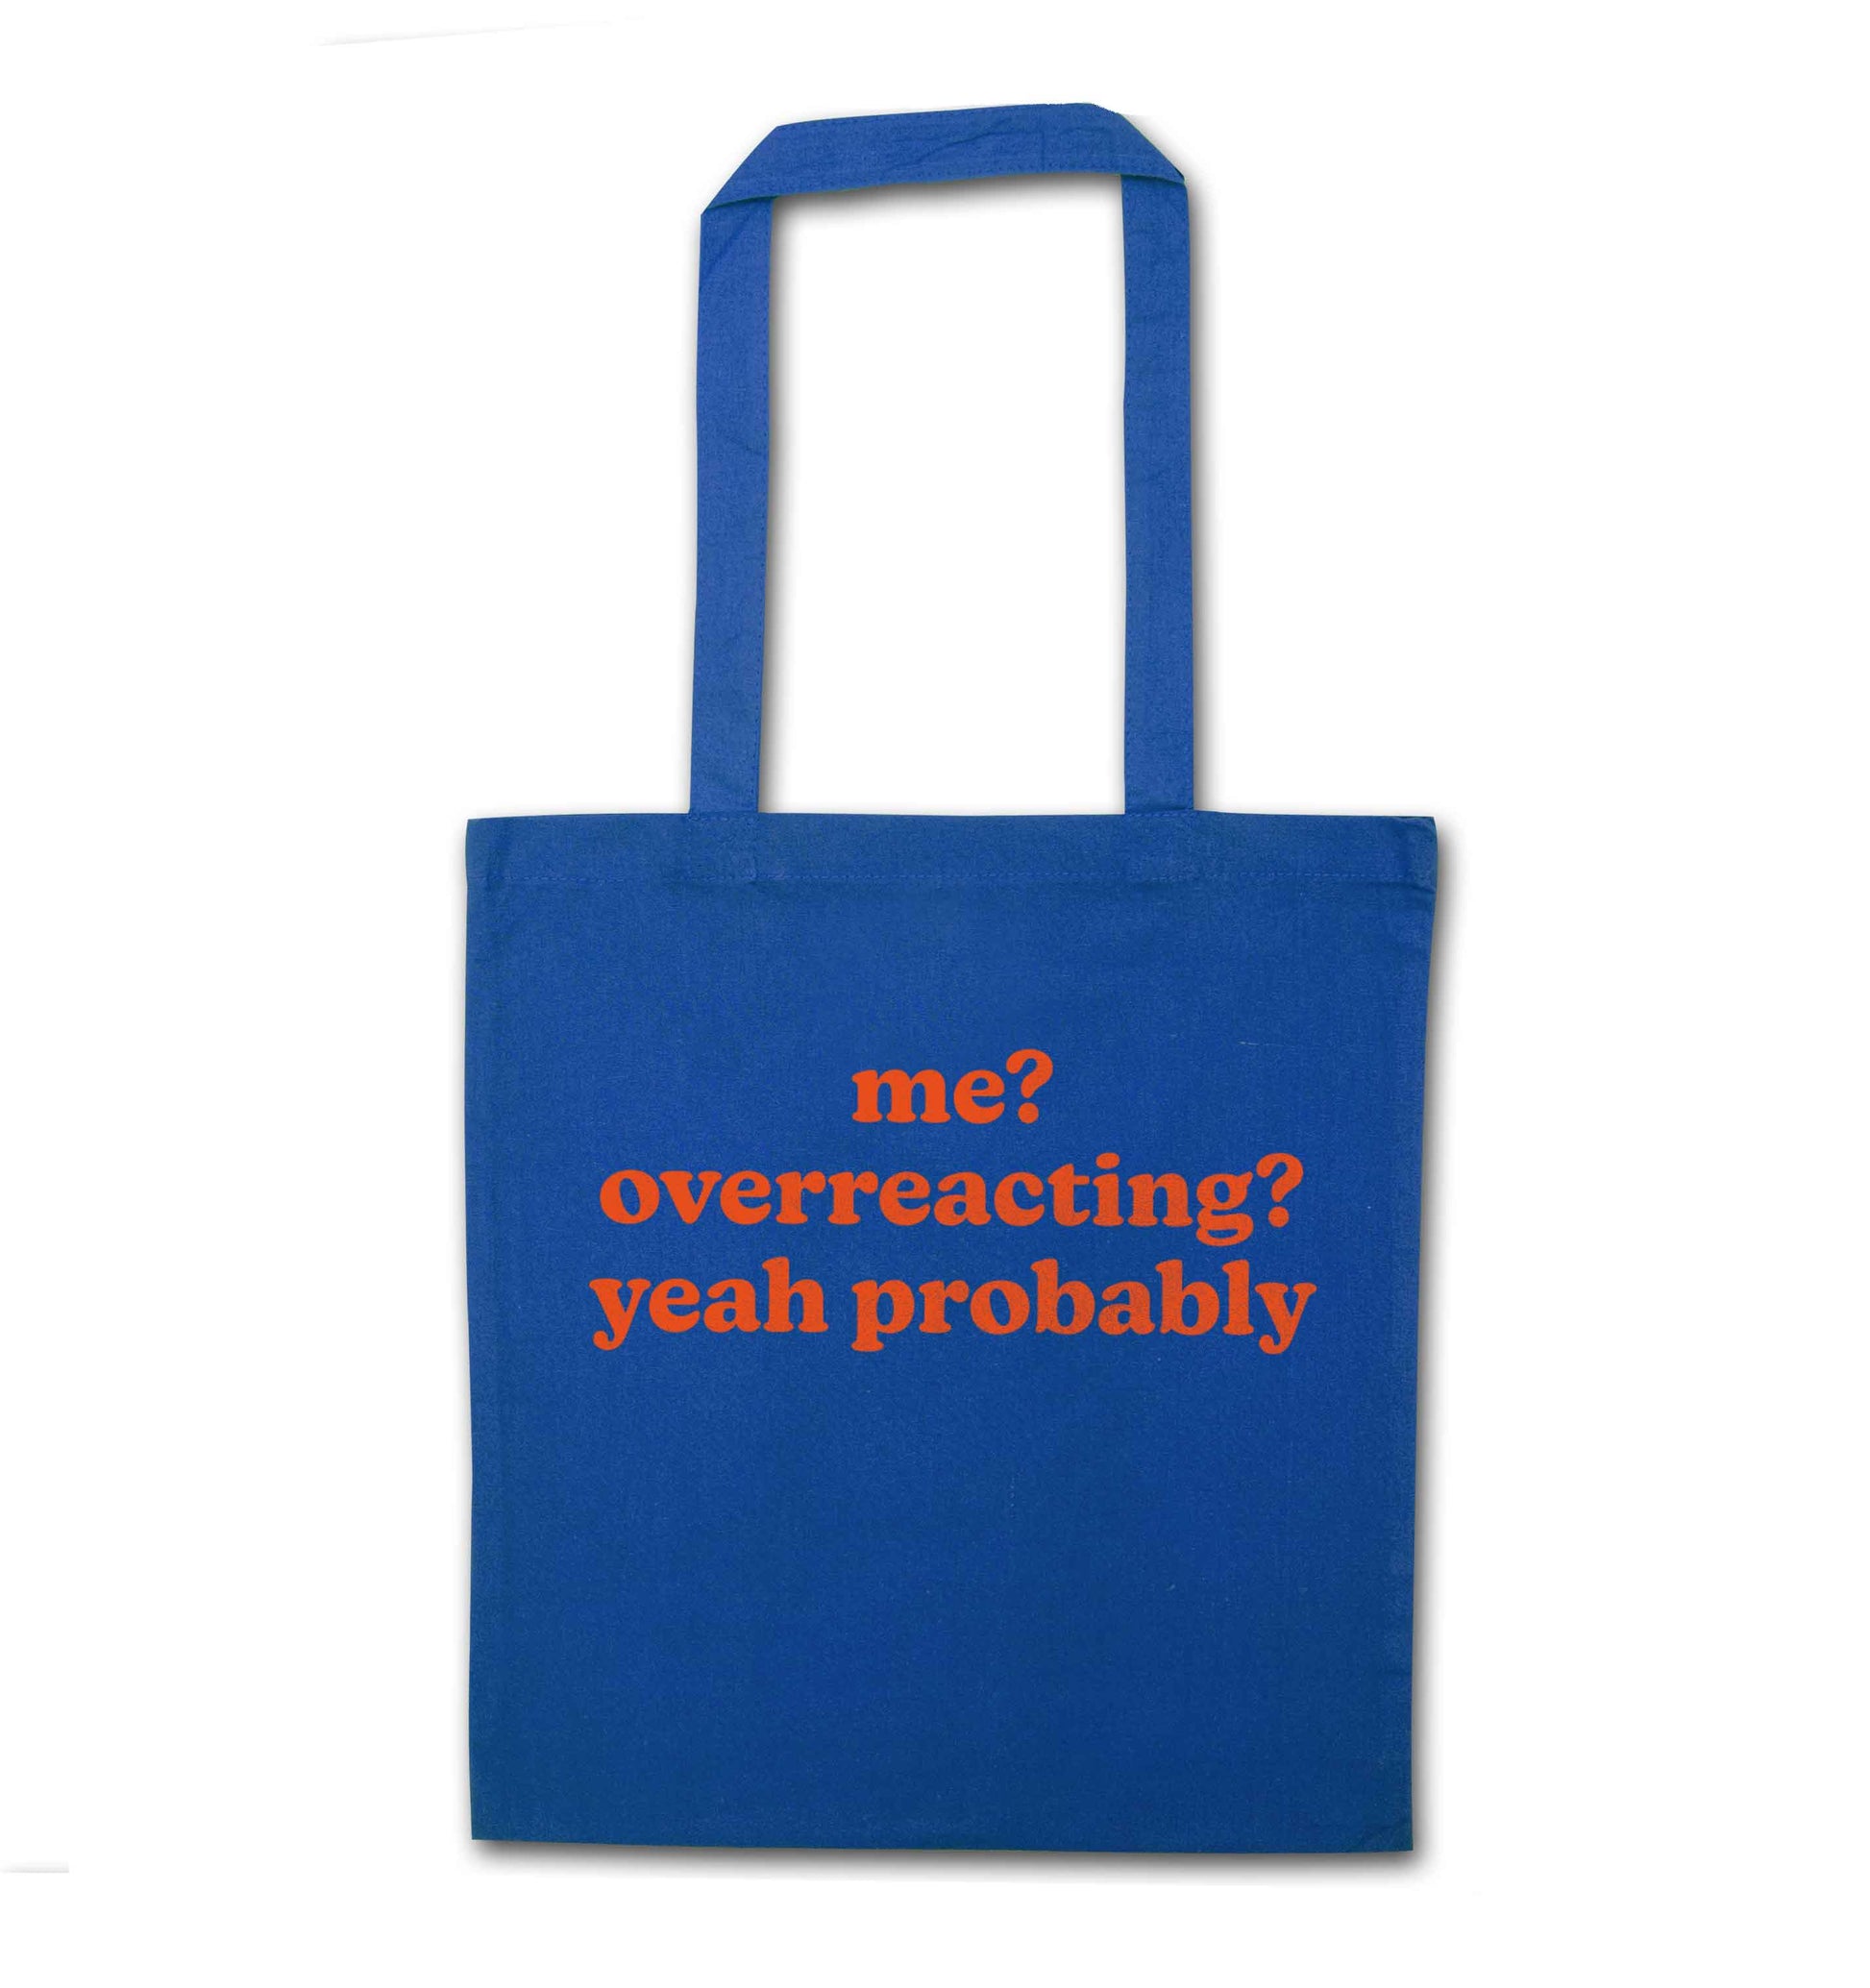 Me? Overreacting? Yeah probably blue tote bag